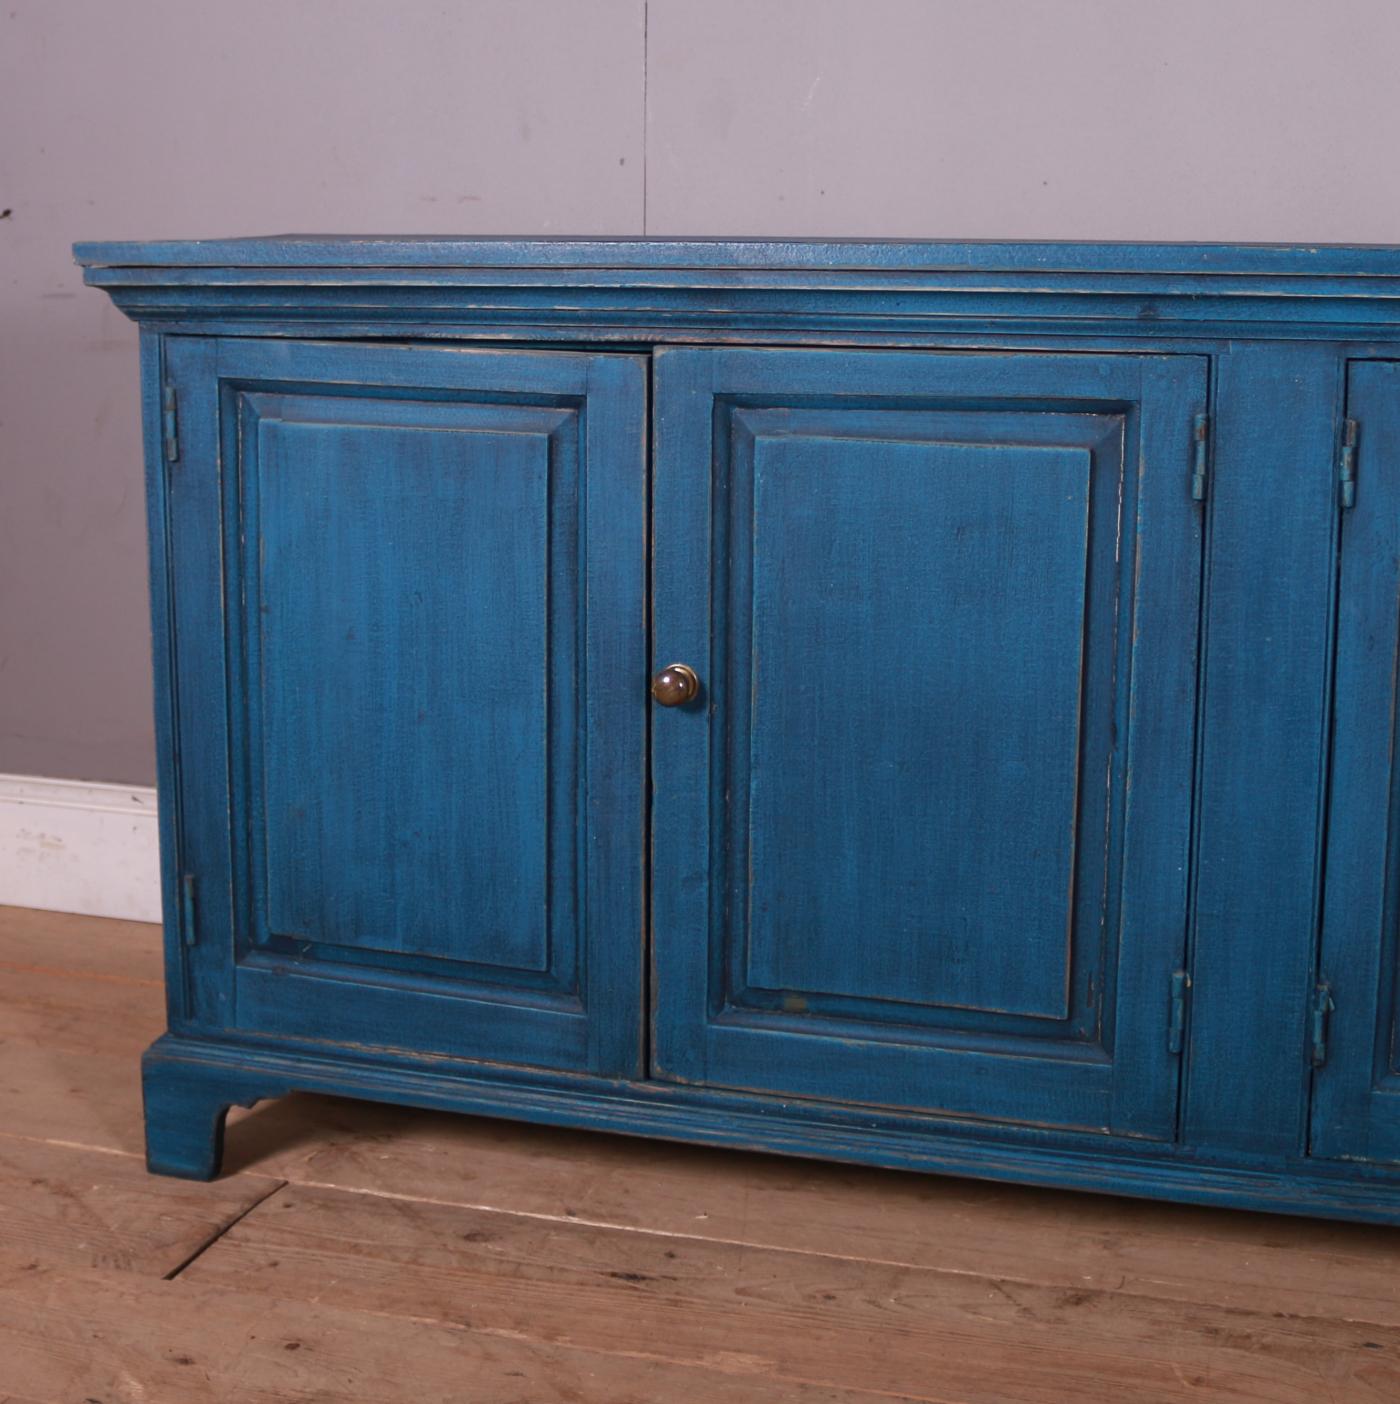 Custom build 4 door painted pine dresser base / buffet.

Can be made to your specification.

Reference: 7335

Dimensions
79 inches (201 cms) Wide
16 inches (41 cms) Deep
33.5 inches (85 cms) High.